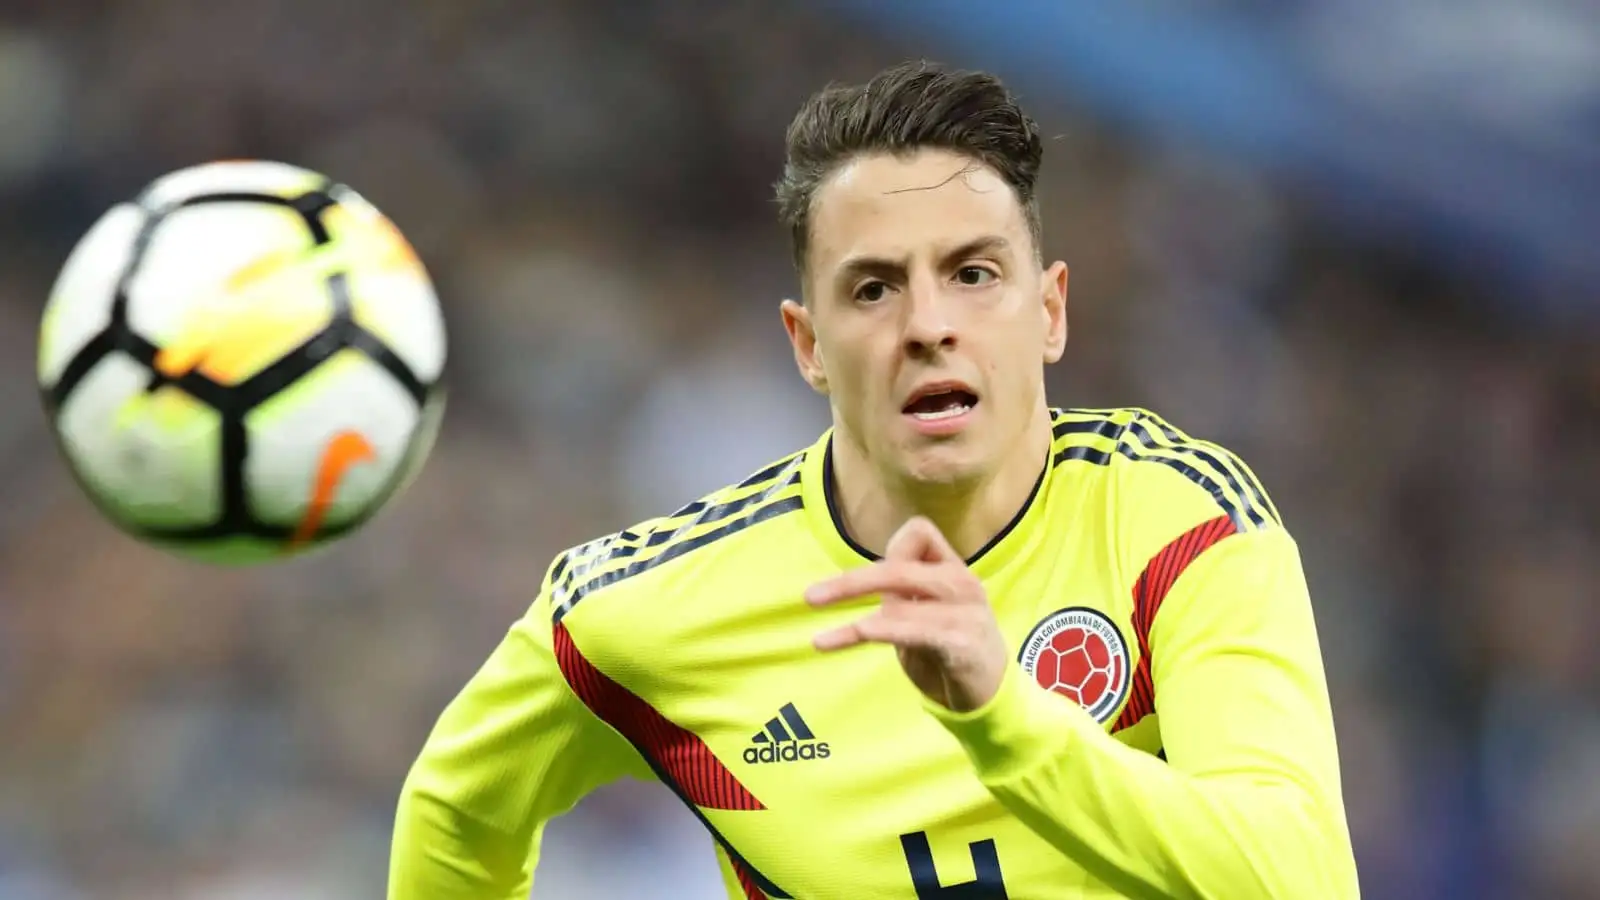 Santiago Arias, Colombia, during International friendly match between France 2-3 Colombia at Stade de France in Saint-Denis, France